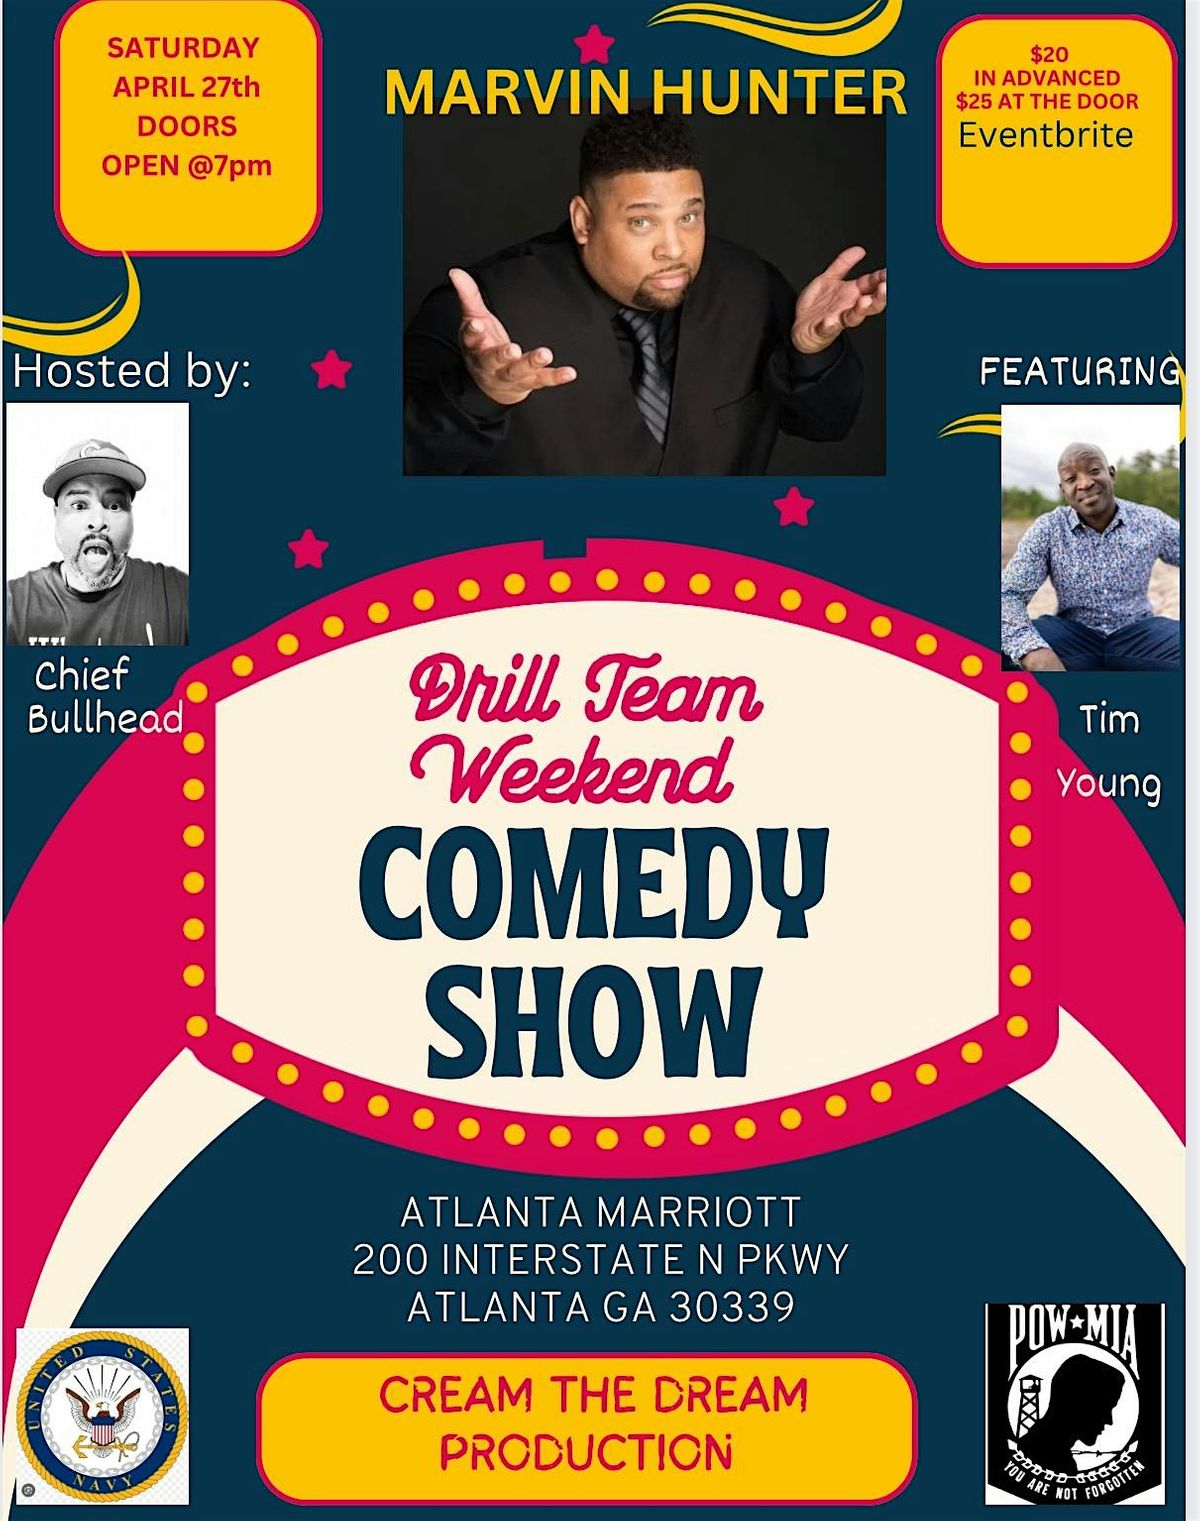 DRILL TEAM COMEDY SHOW STARRING MARVIN HUNTER